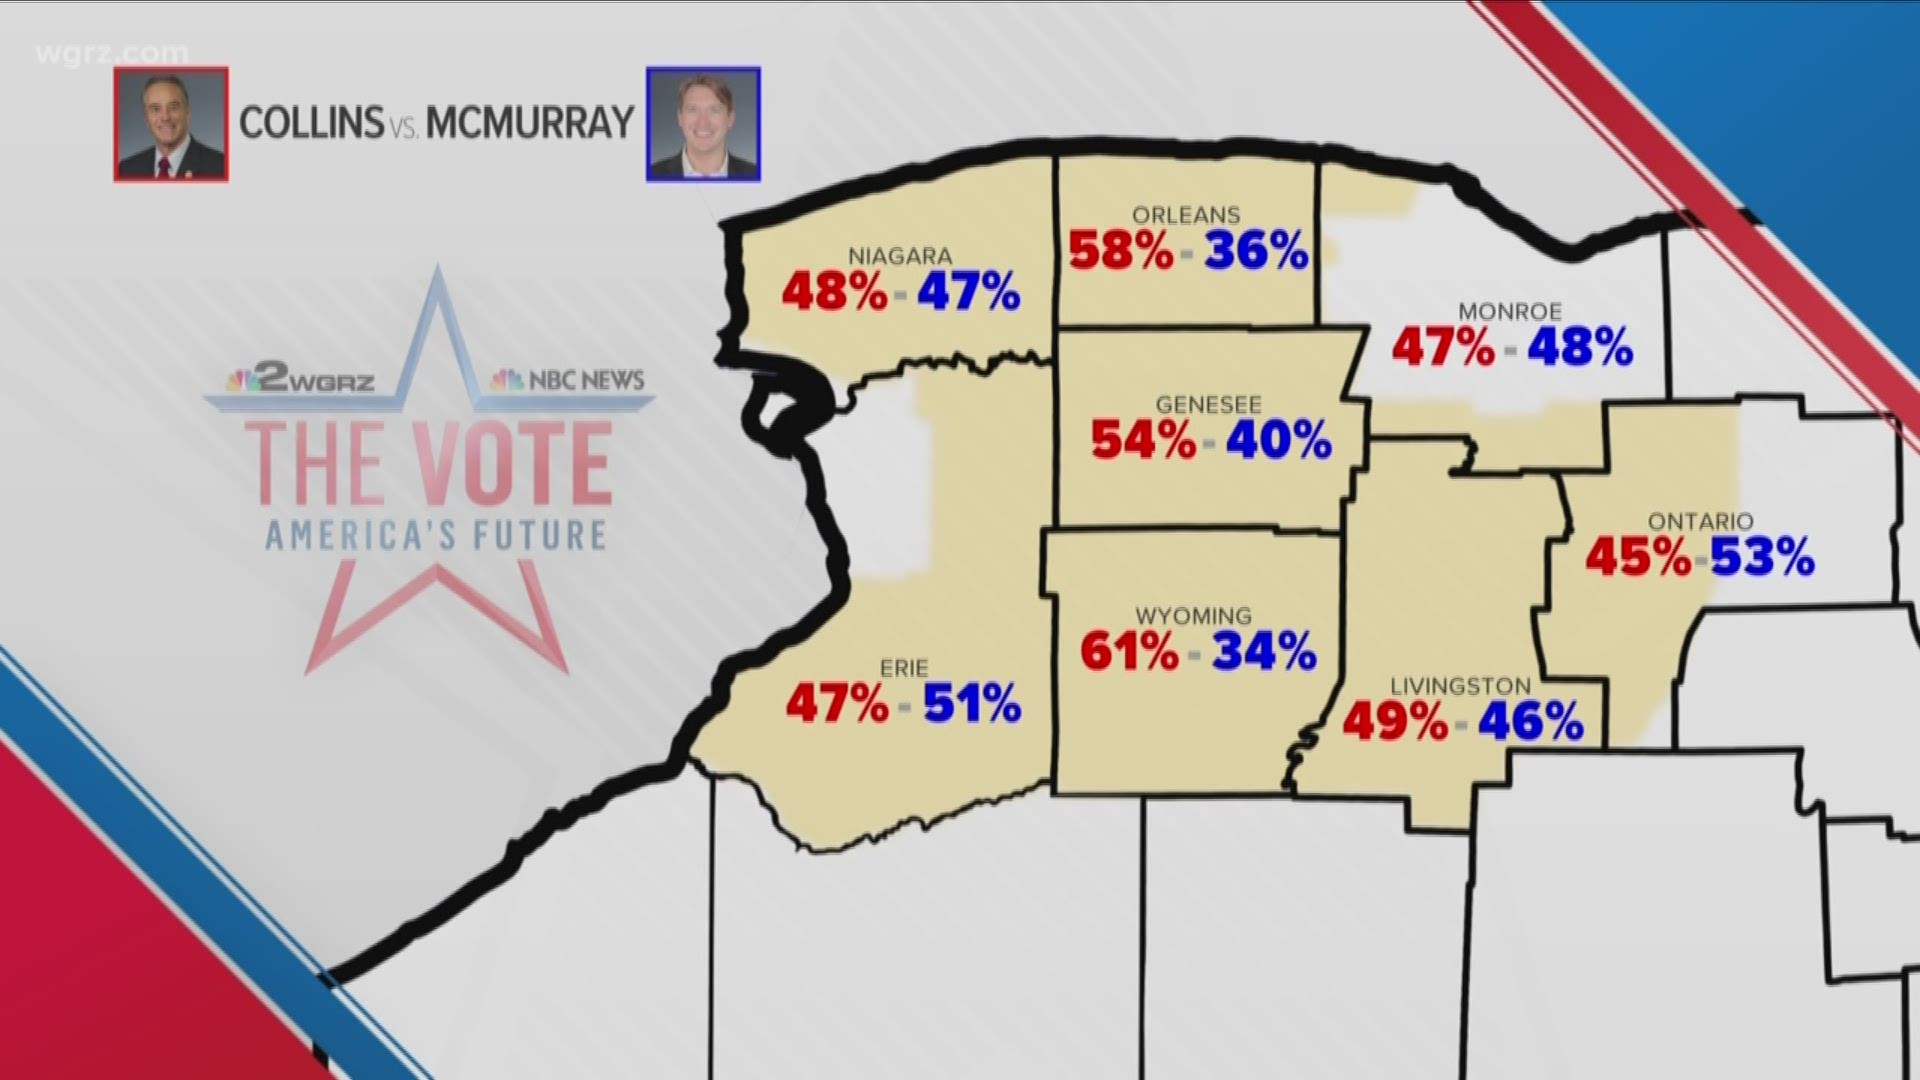 McMurray: We'll Fight For "Every Single Vote"